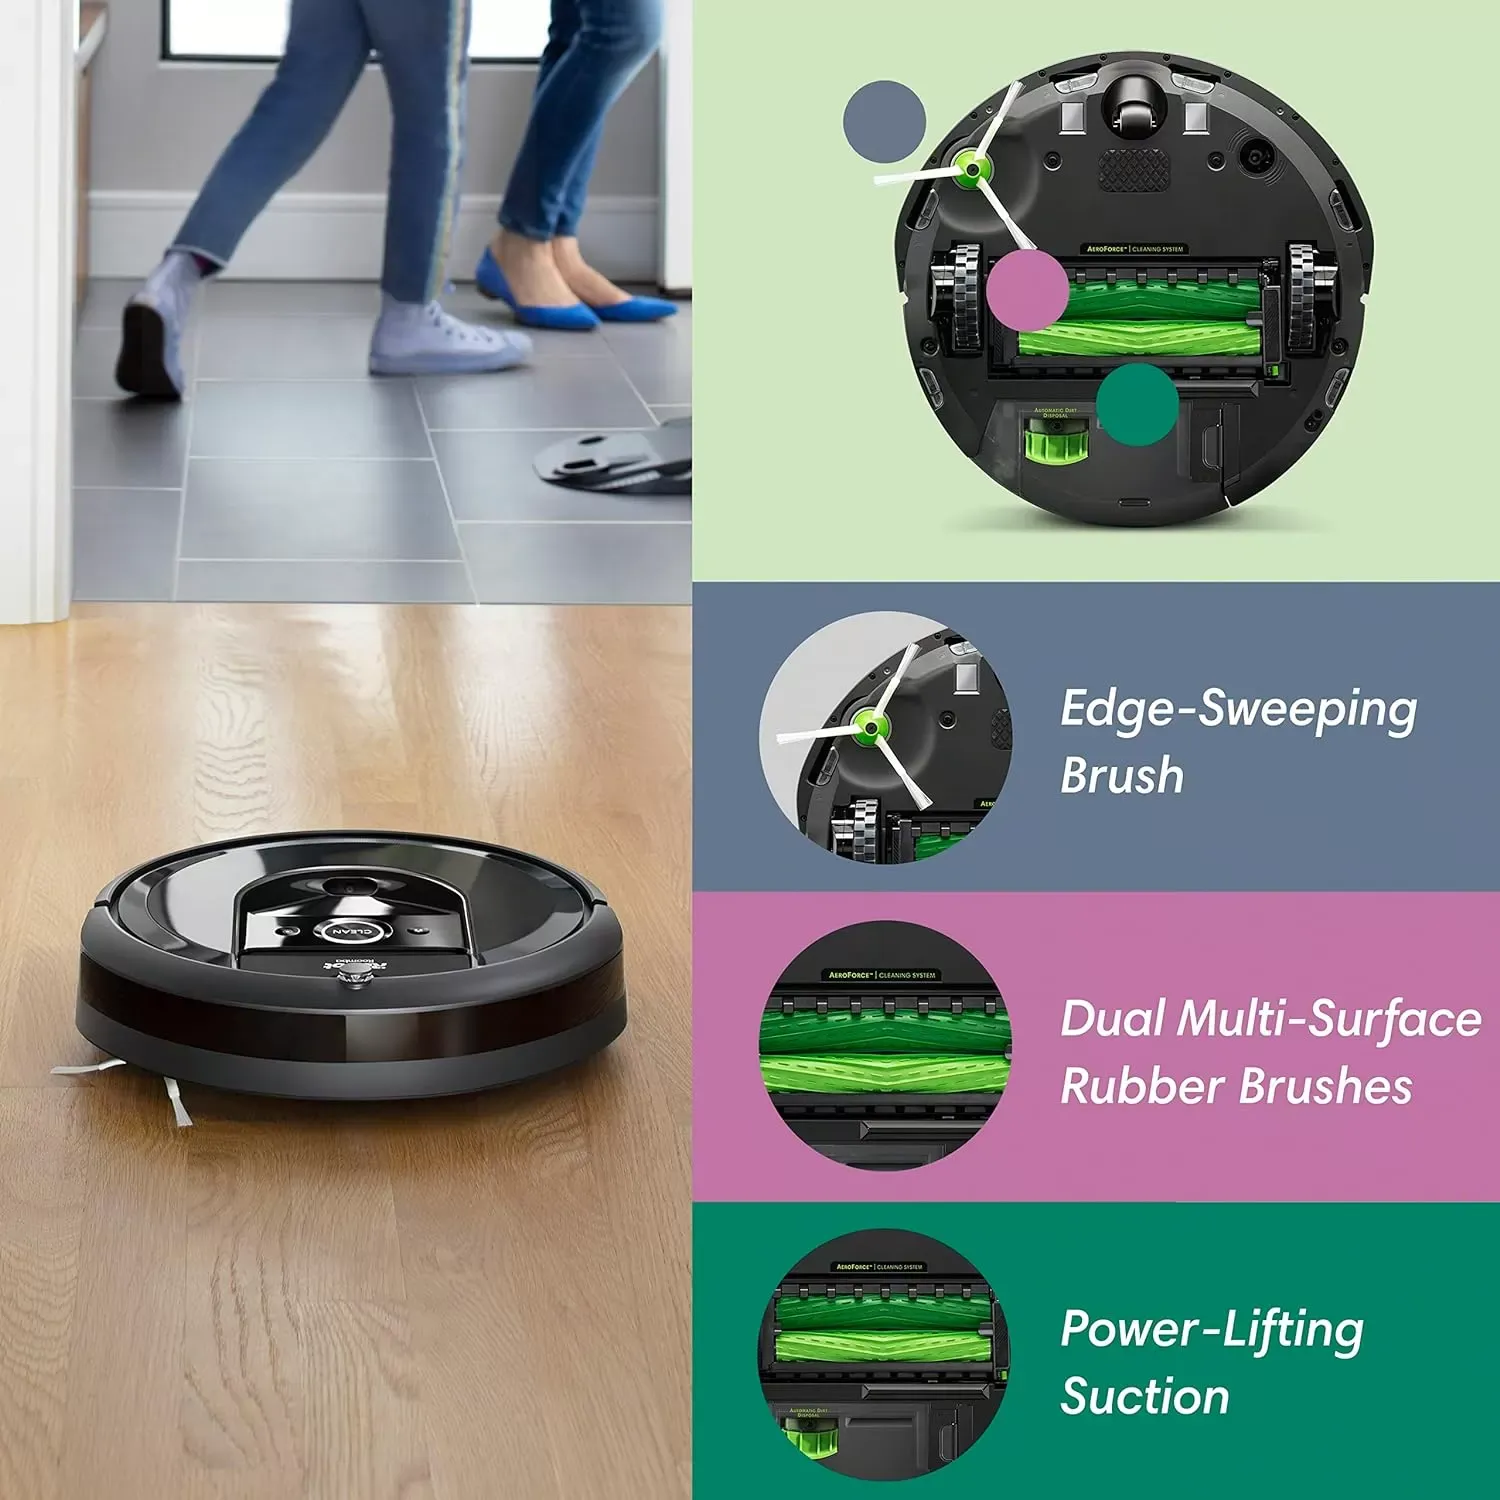 iRobot Roomba j6+ (6550) Self-Emptying Robot Vacuum – Identifies and avoids pet Waste & Cords, Empties Itself for 60 Days, Smart Mapping, Compatible with Alexa, Ideal for Pet Hair, Roomba J6+